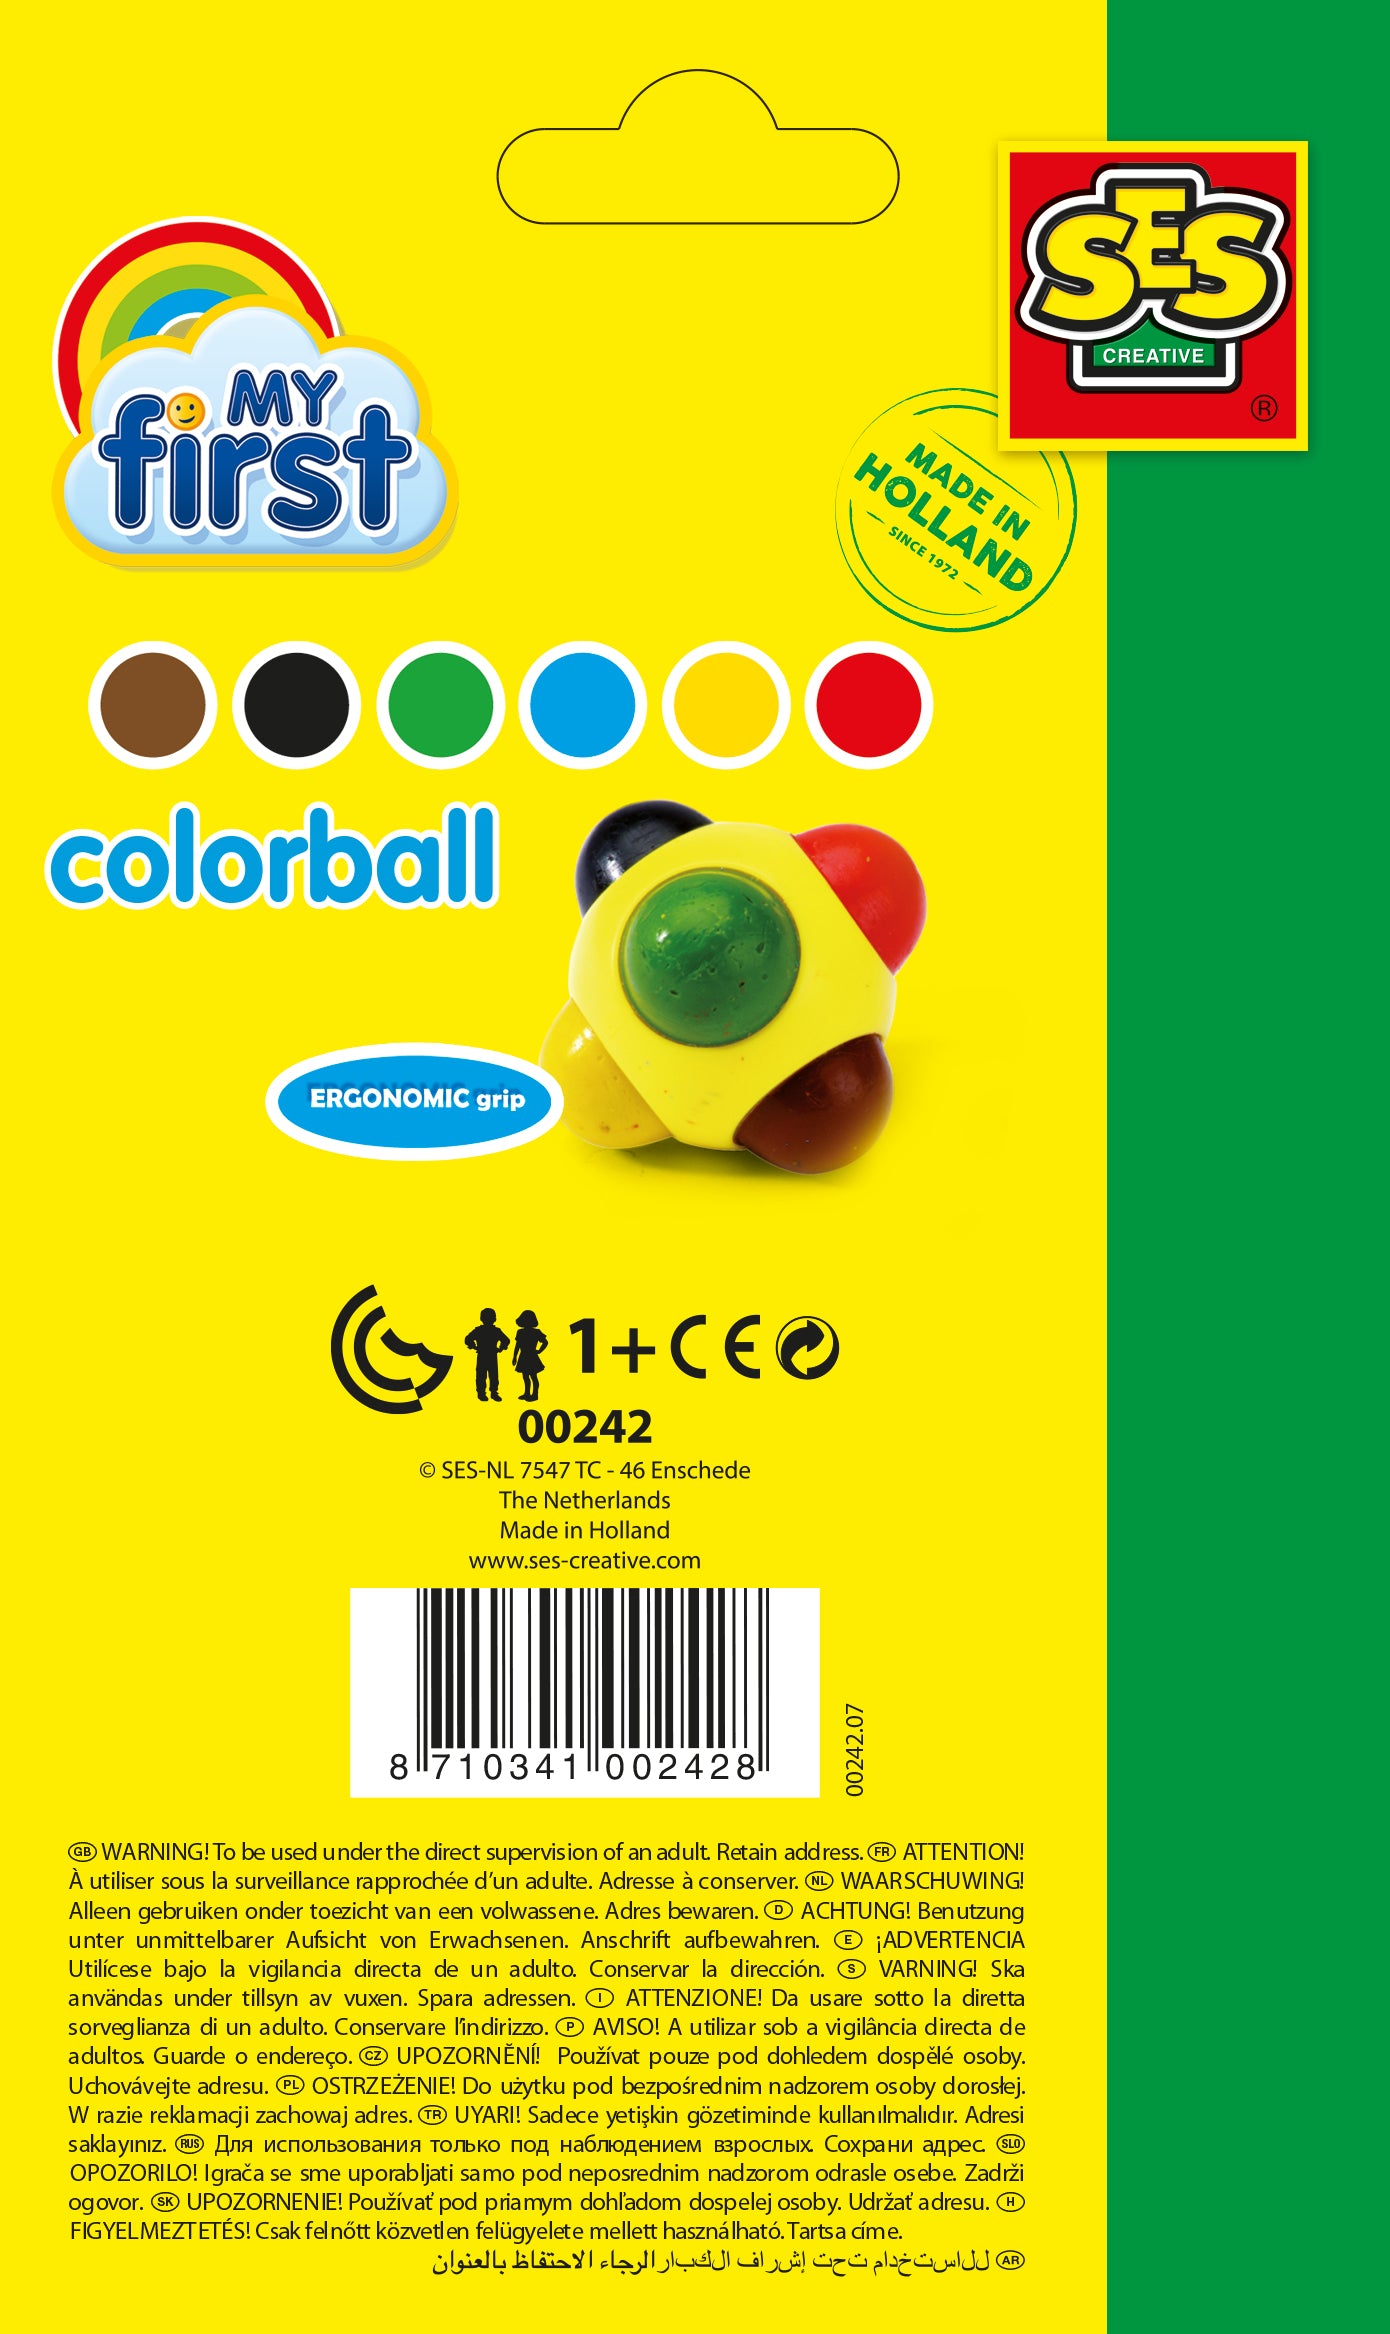 My First-Colorball - SES